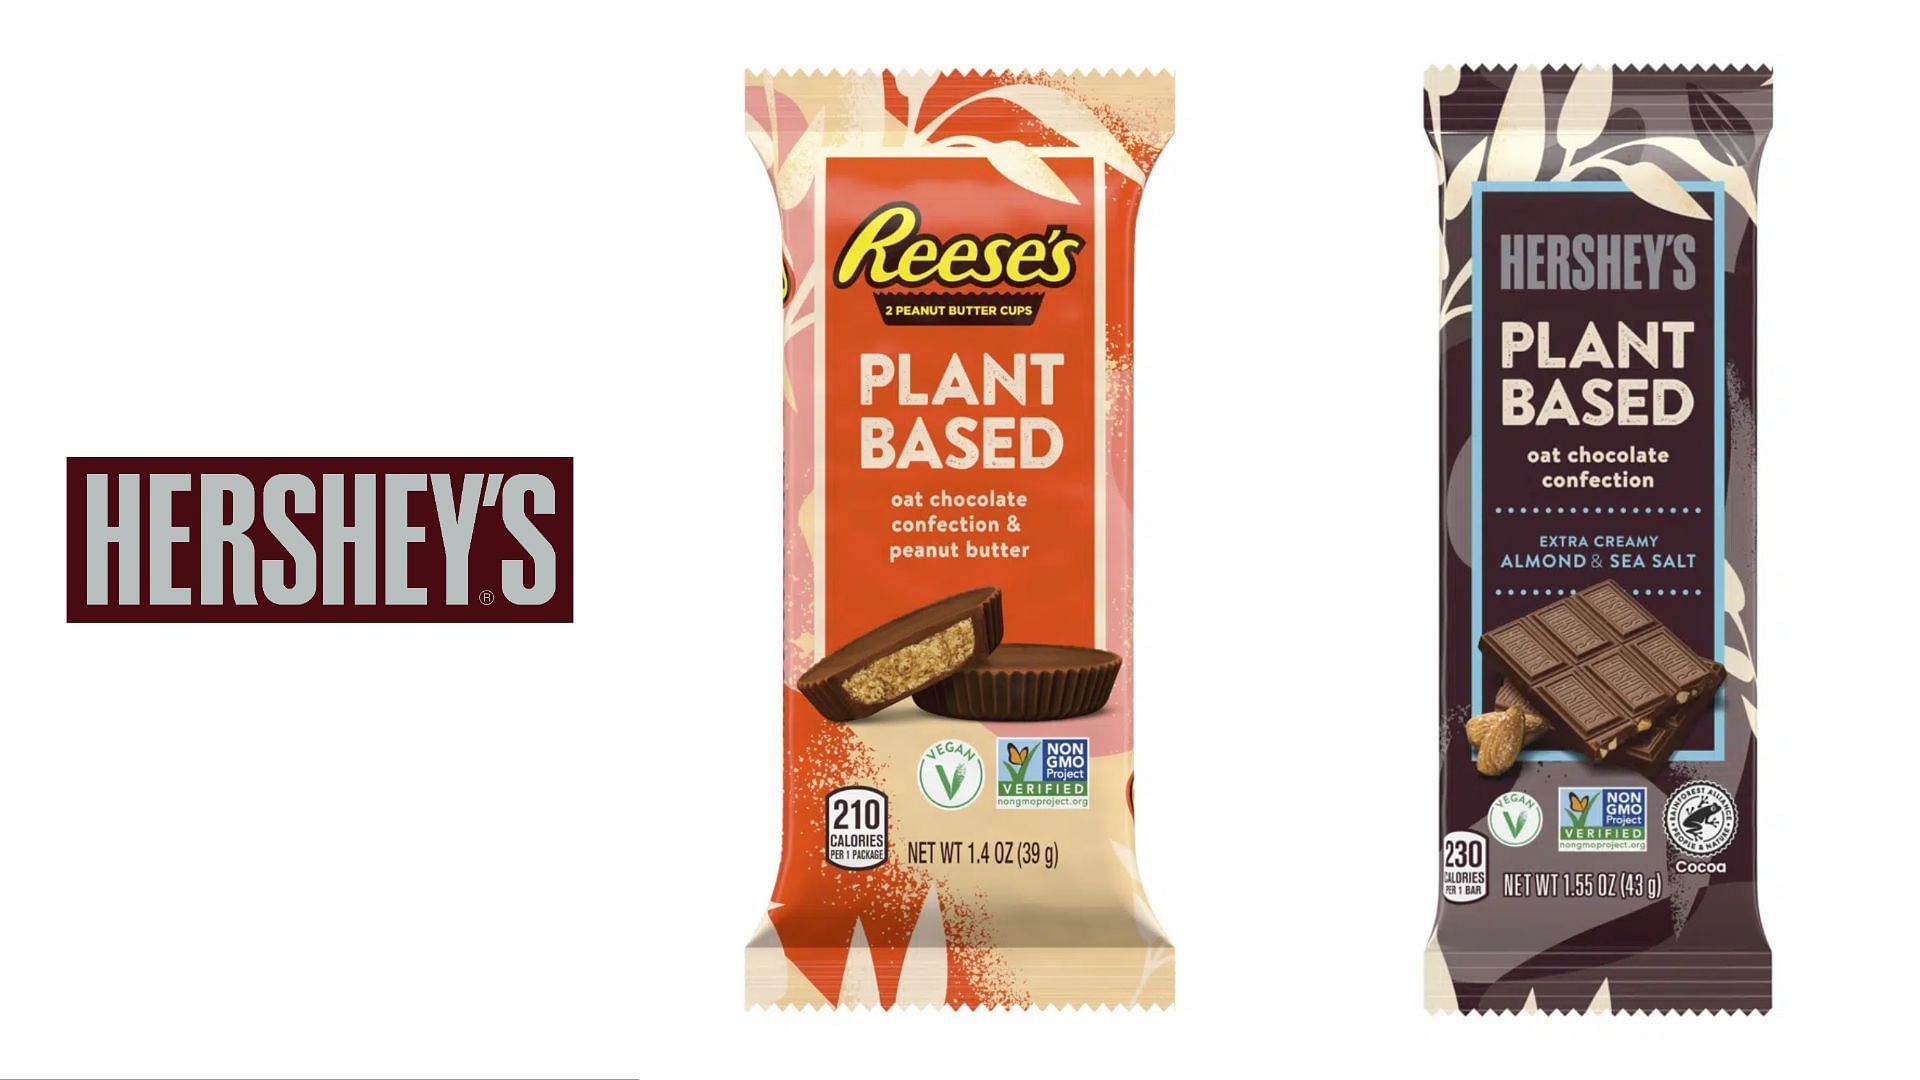 the Hershey company introduced new plant-based additions to Reese